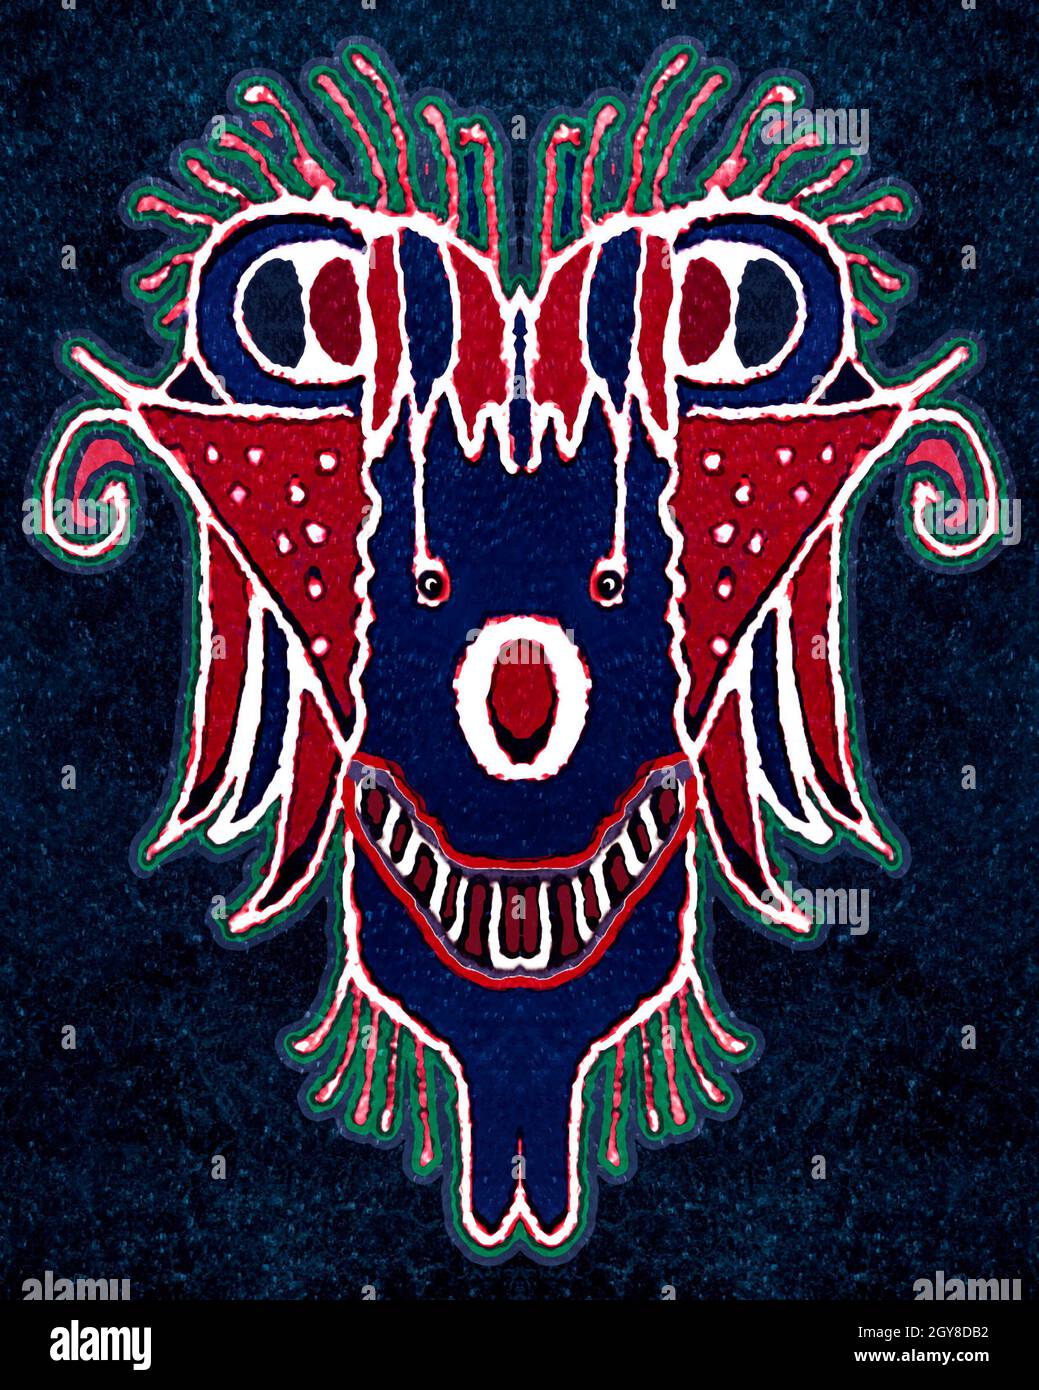 Tribal style creepy mask in dark blue and red colors illustration Stock Photo